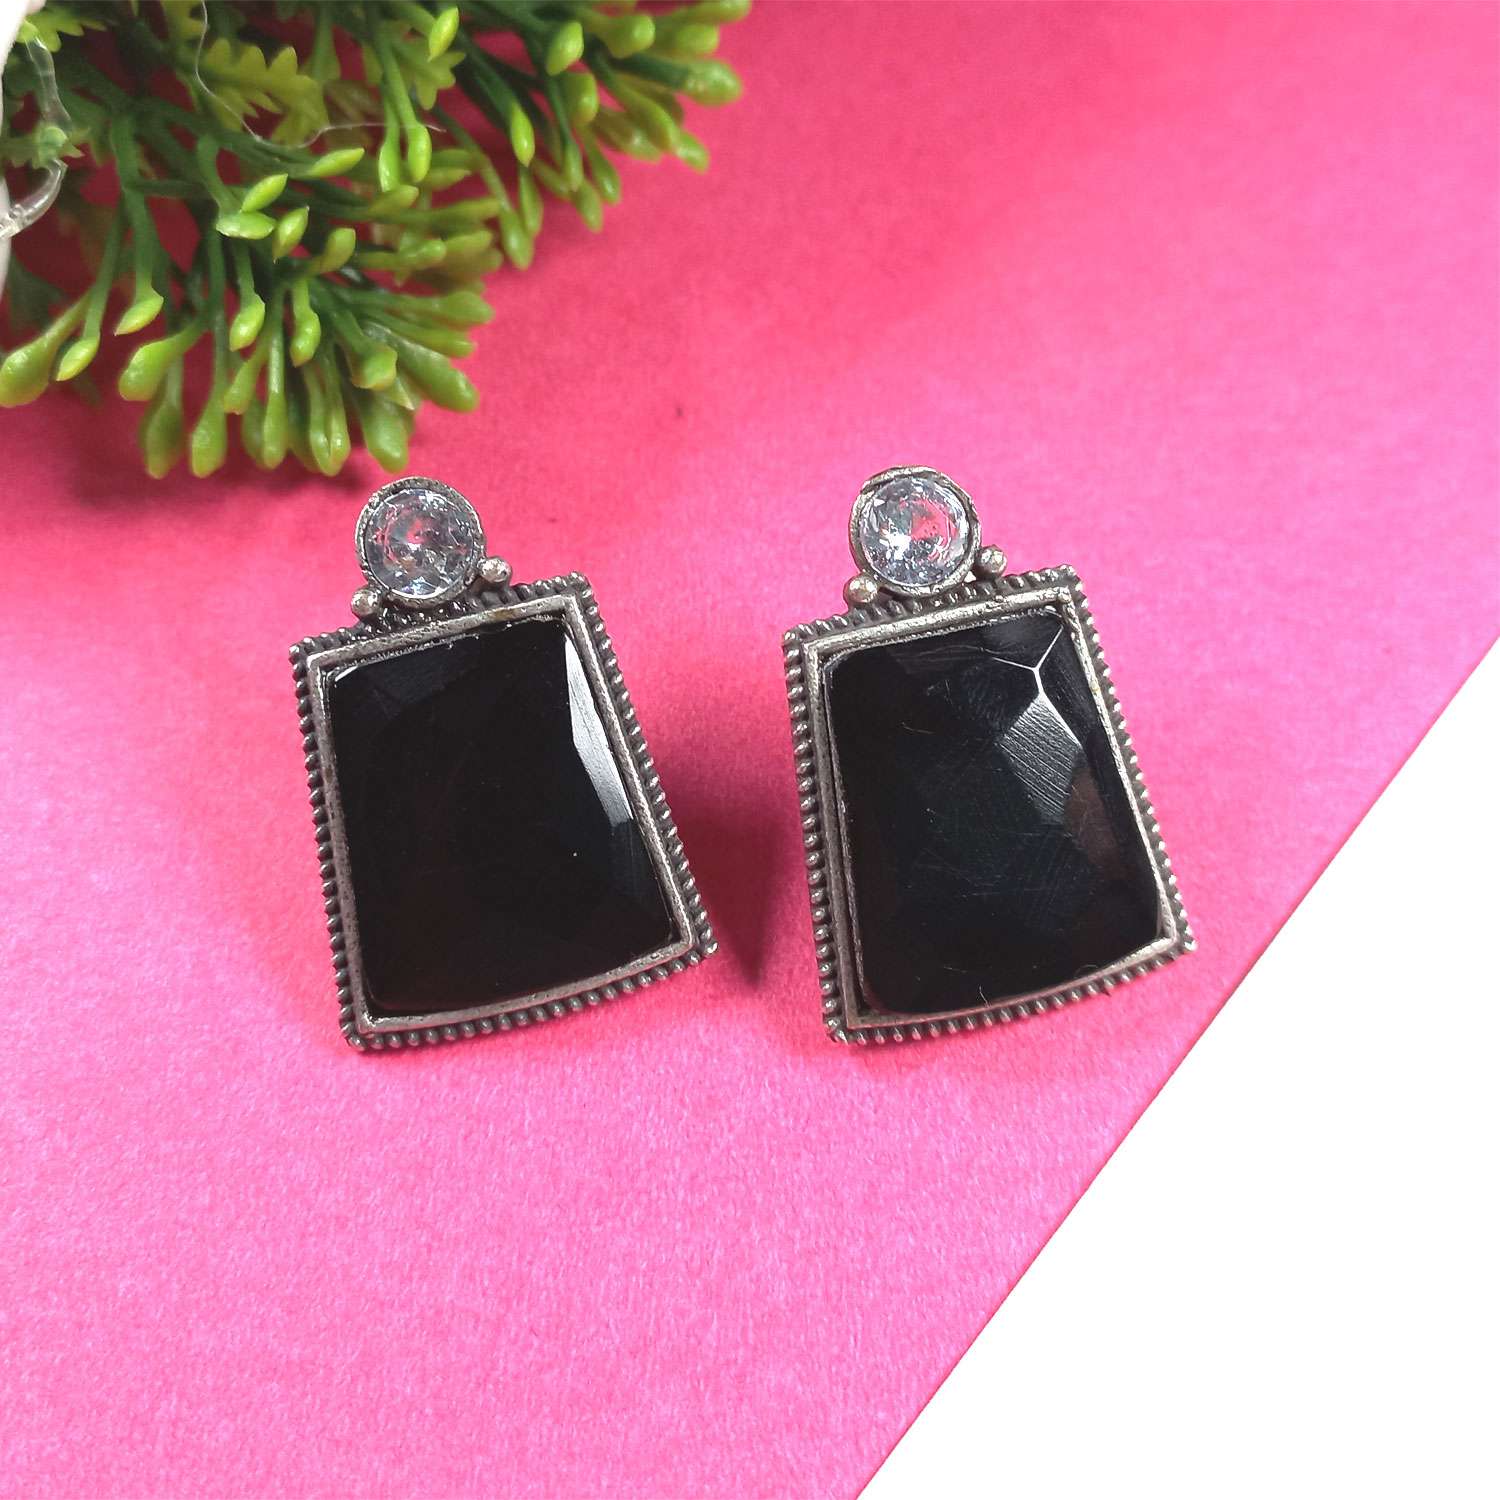 Large Round Black Spinel 6 Prong Stud Earrings - Sarah O.